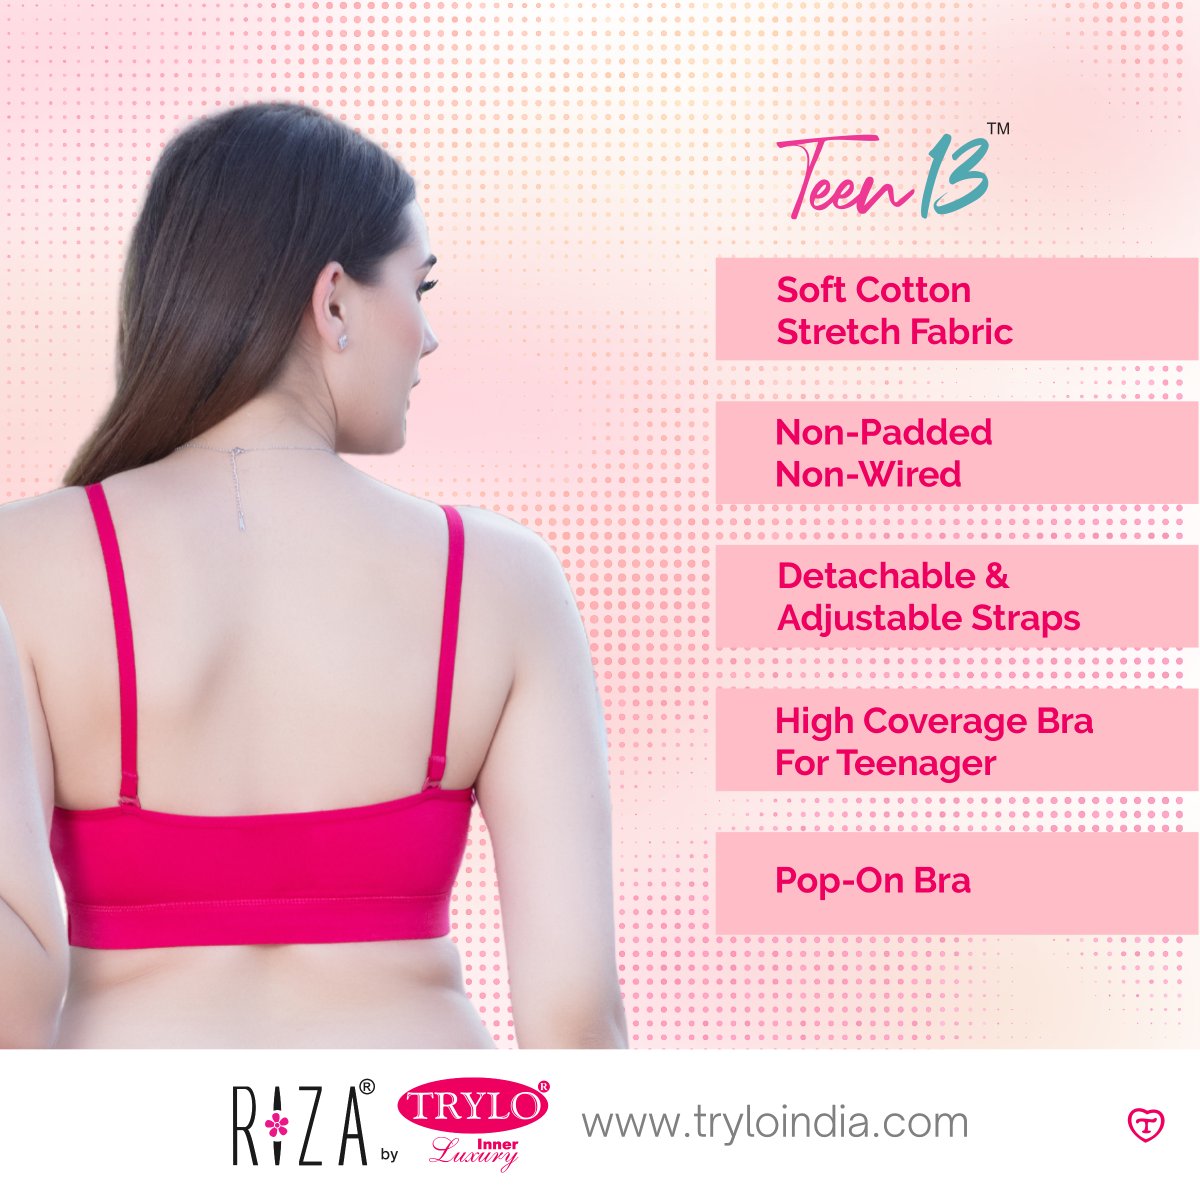 The non-padded design of the Riza Teen 13 Bra provides a natural silhouette that flatters your developing figure. 
 
Product Shown :- Riza Teen 13

#TryloIndia #TryloIntimates #RizaIntimates #RizabyTrylo #RizaTeen13 #ComfortAndSupport #TeenBraEssentials